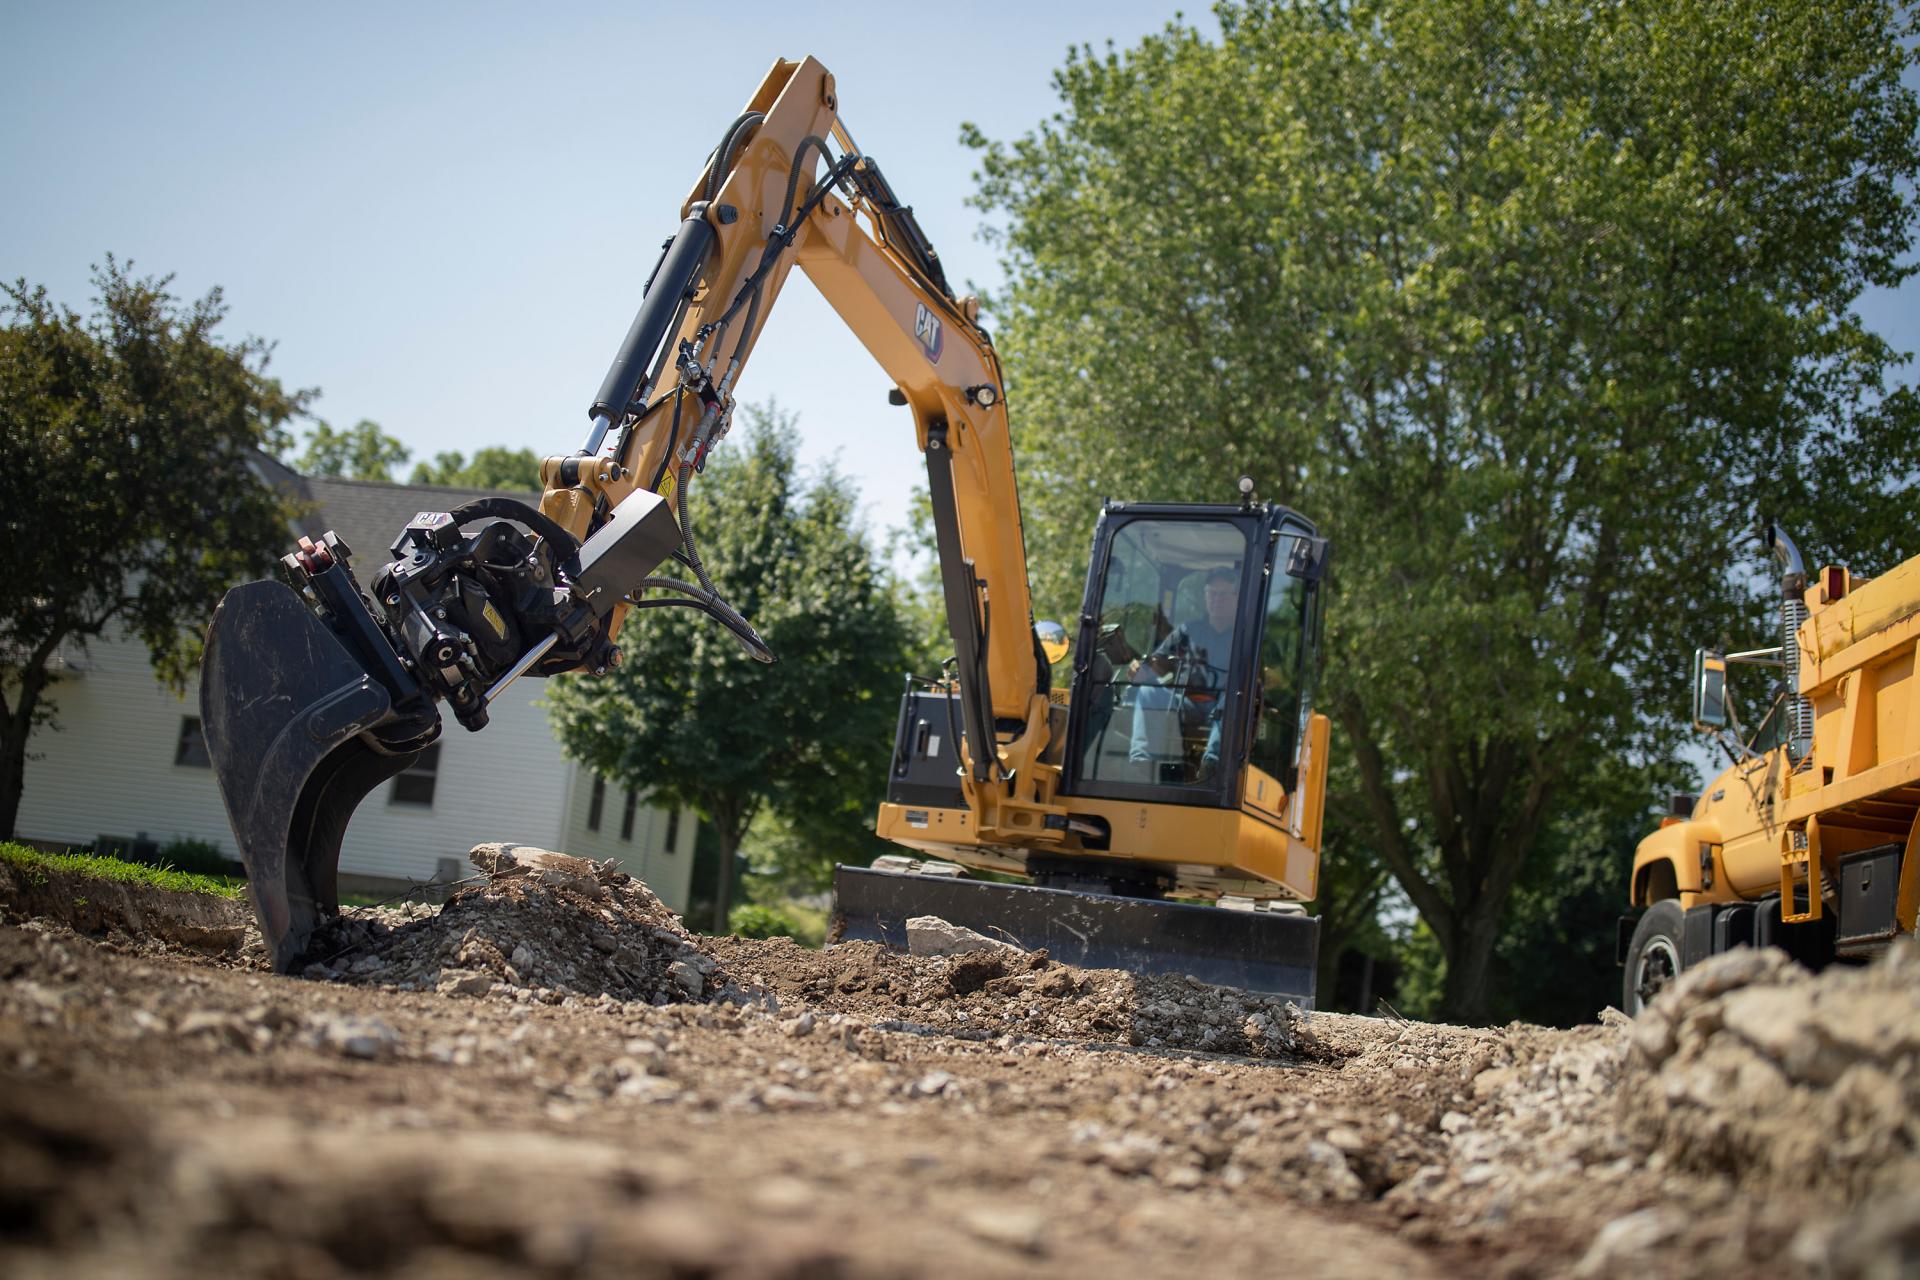 Caterpillar expands Tilt Rotate System (TRS) offering to work with Cat® Mini Excavators